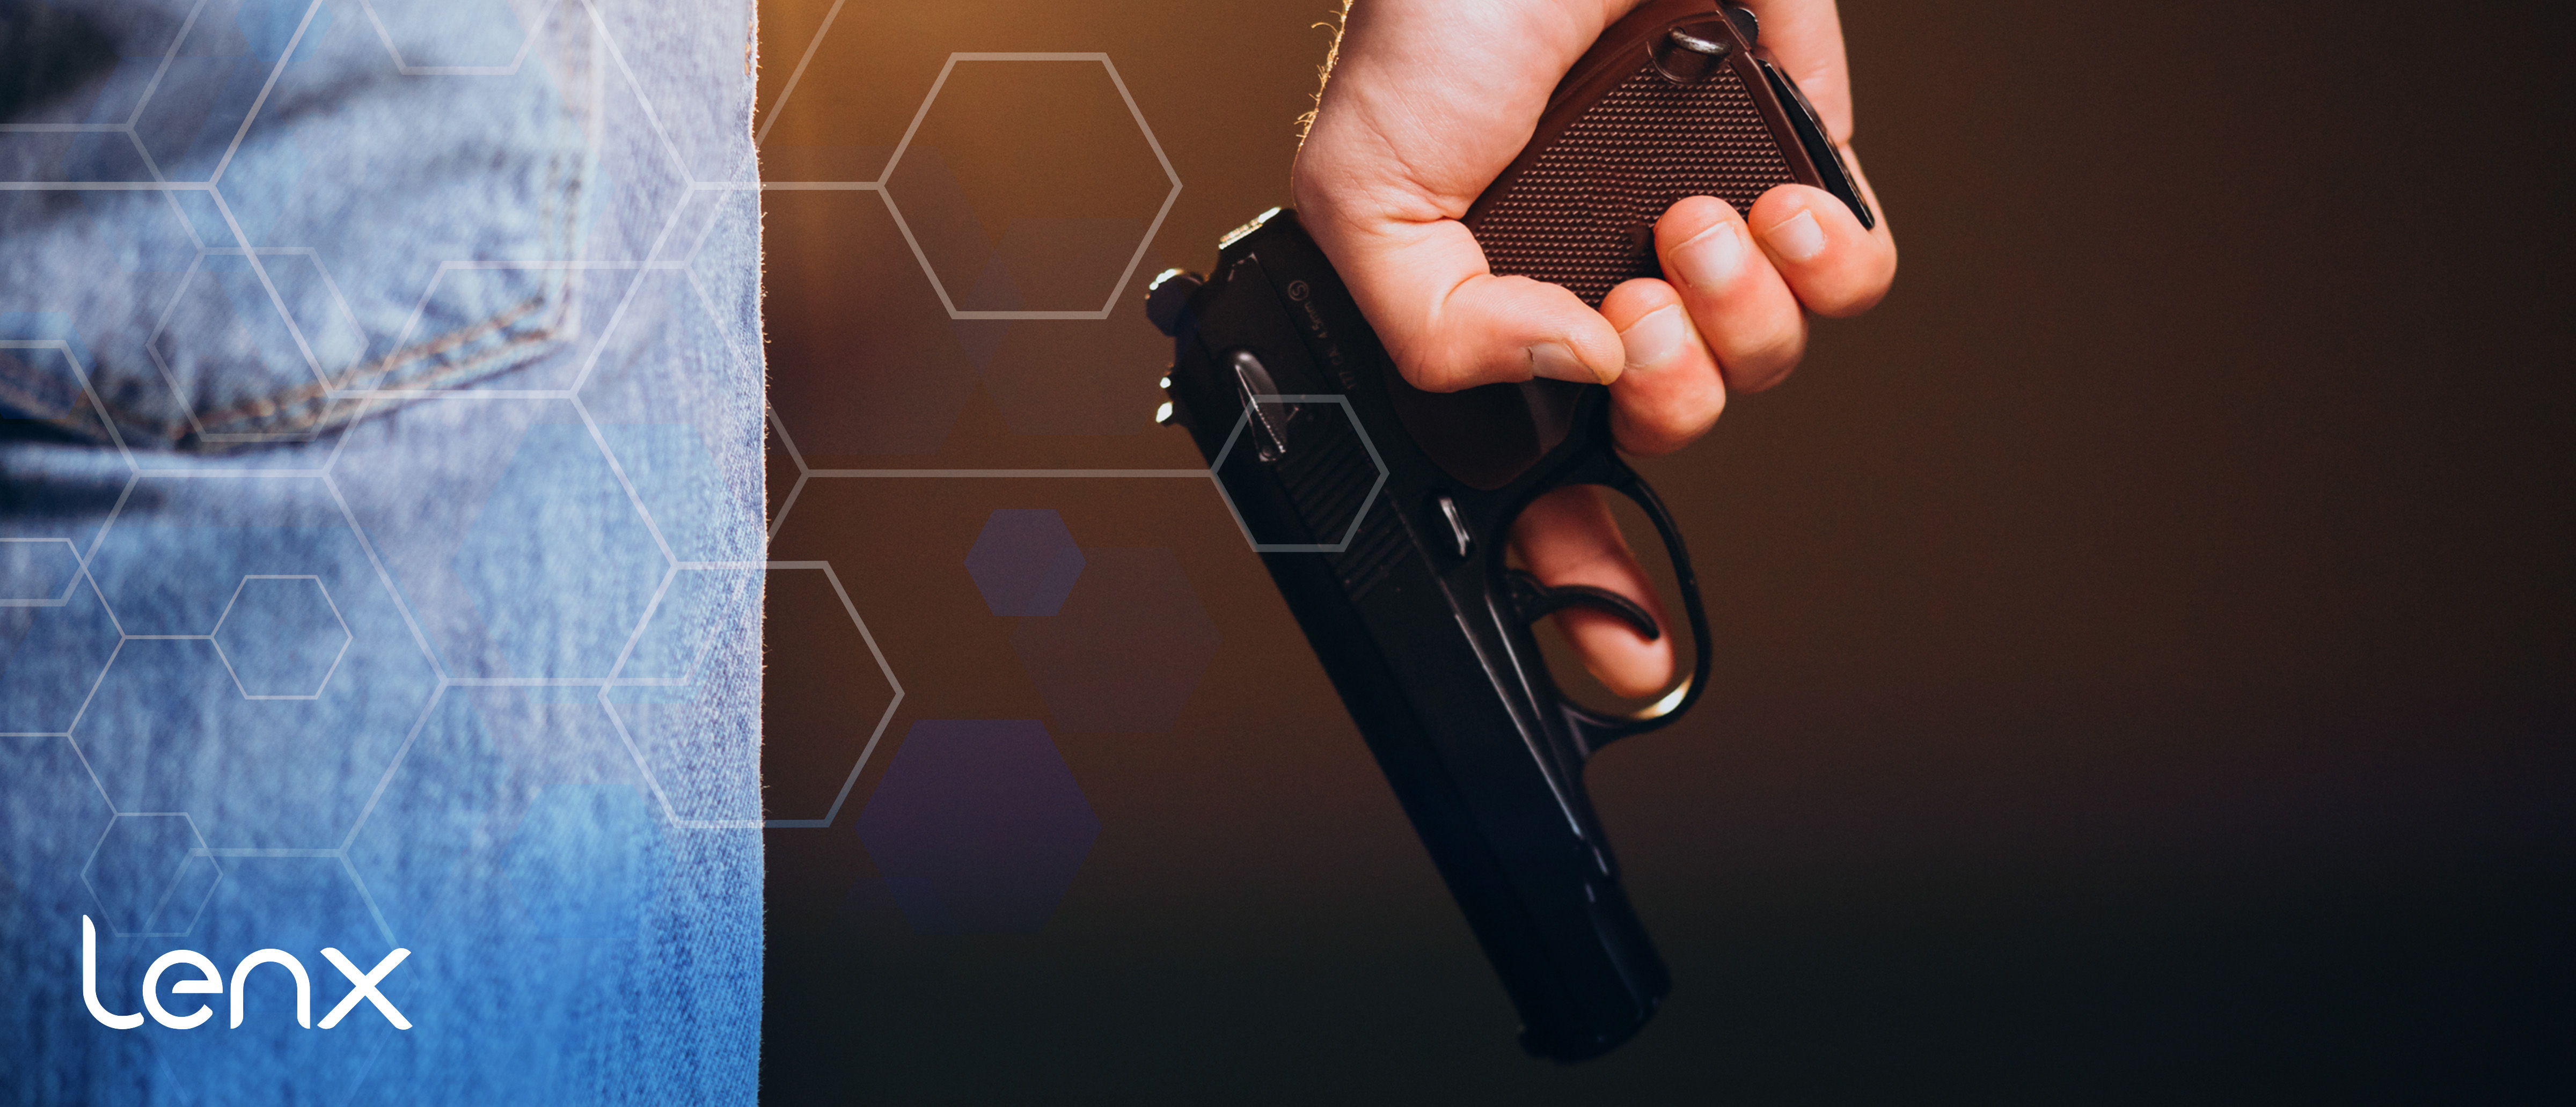 How AI Security, Active Shooter Detection Differentiates Threats